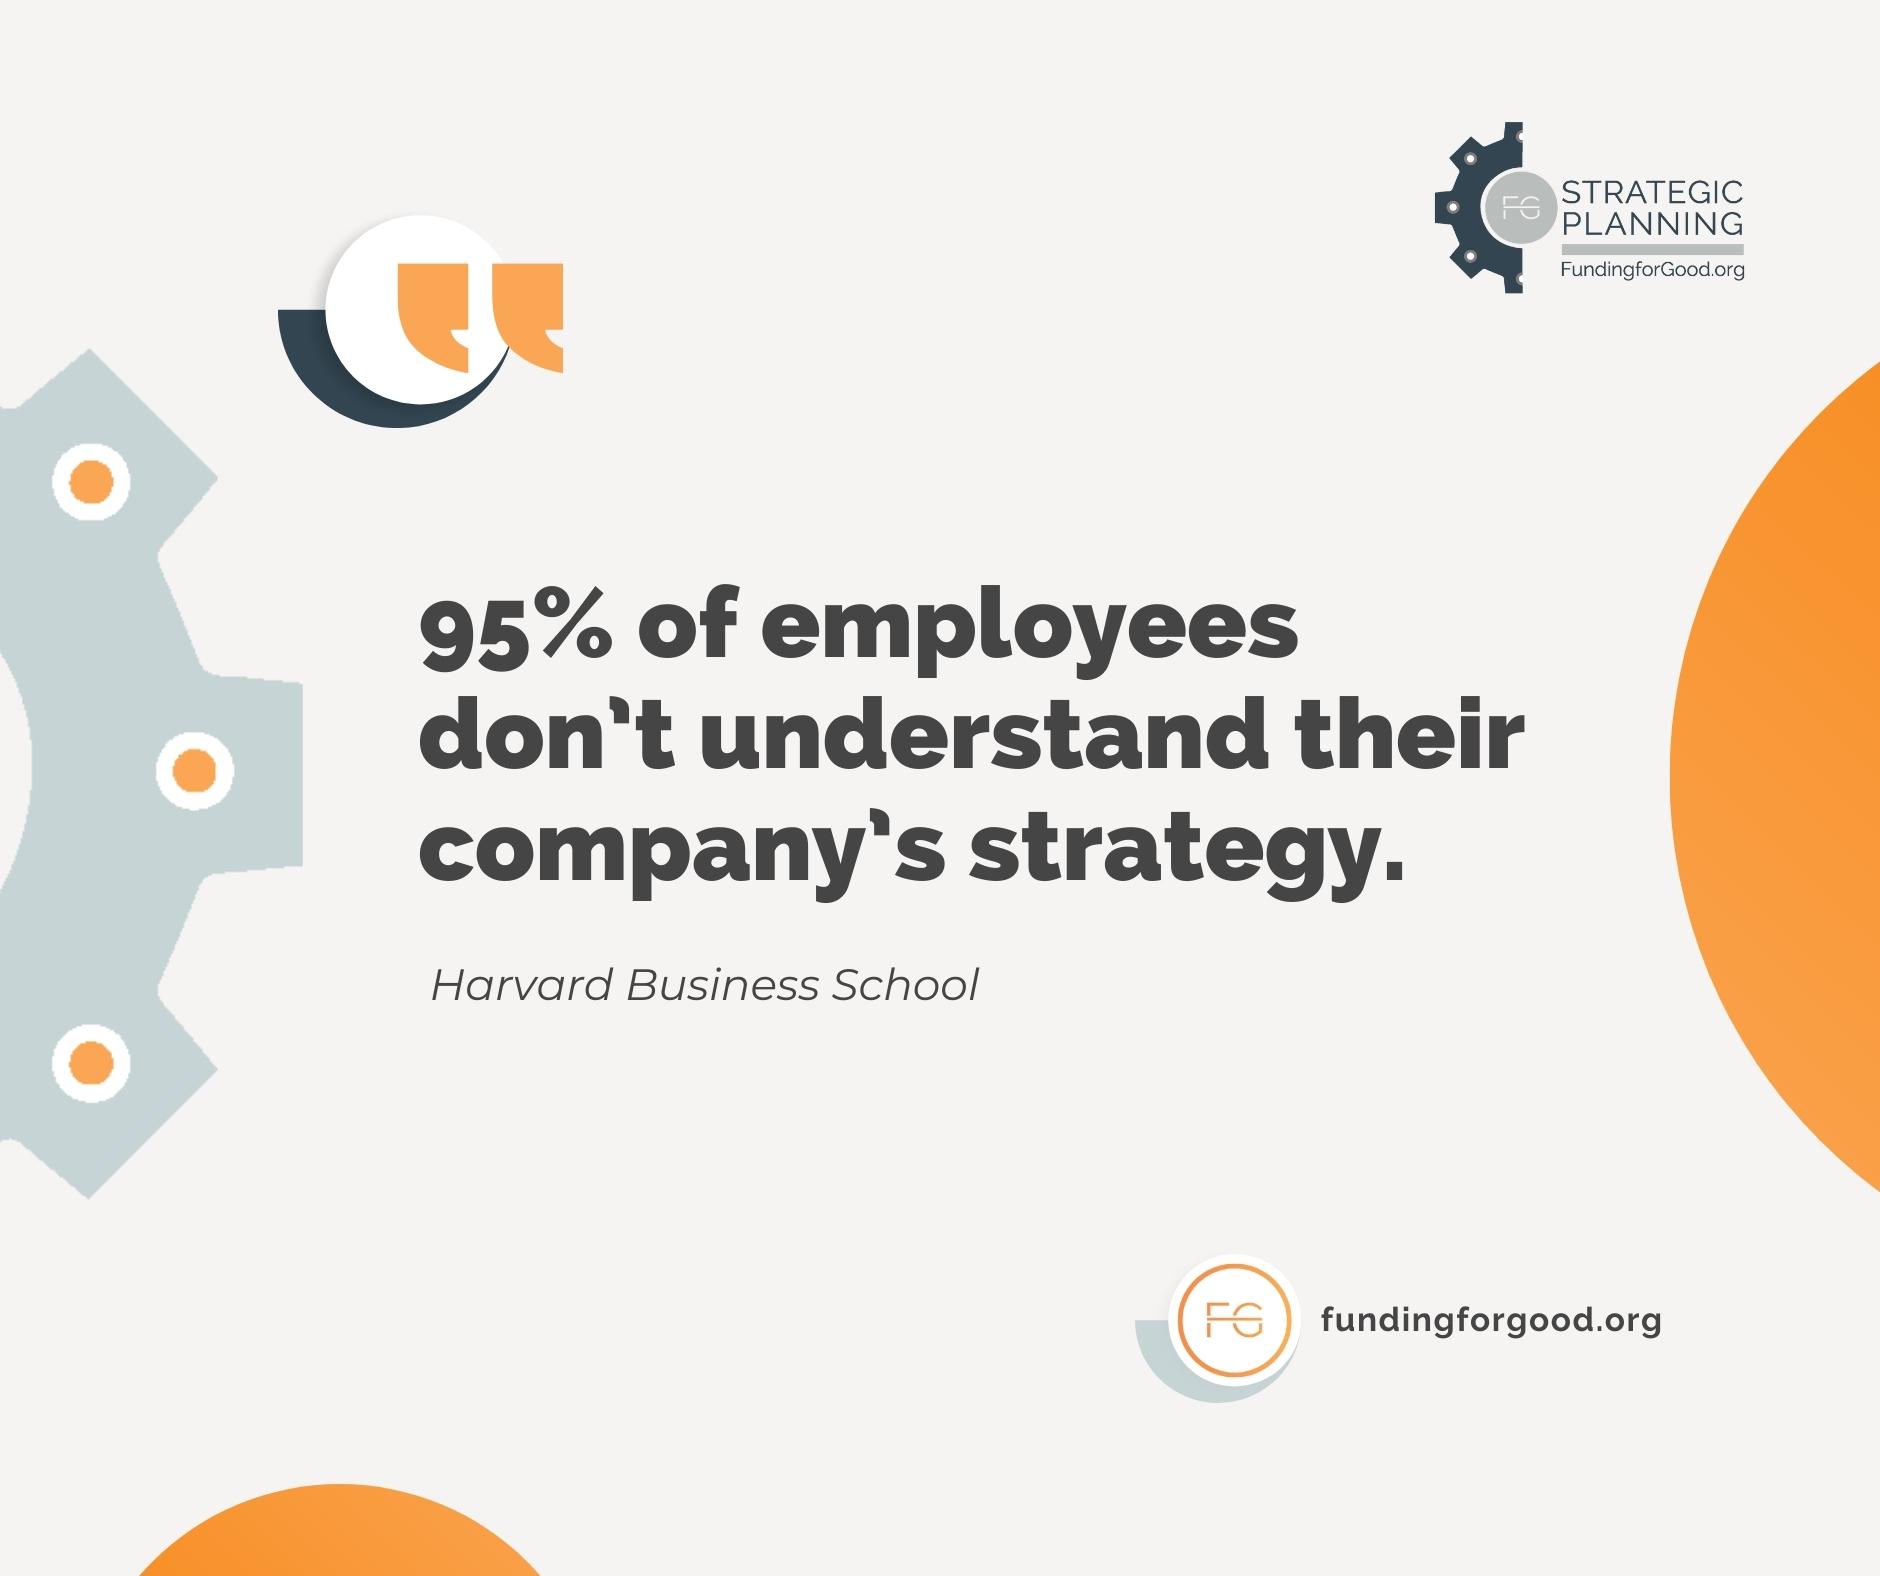 Statistics about strategic planning: 95% of employees don't understand their company's strategy.